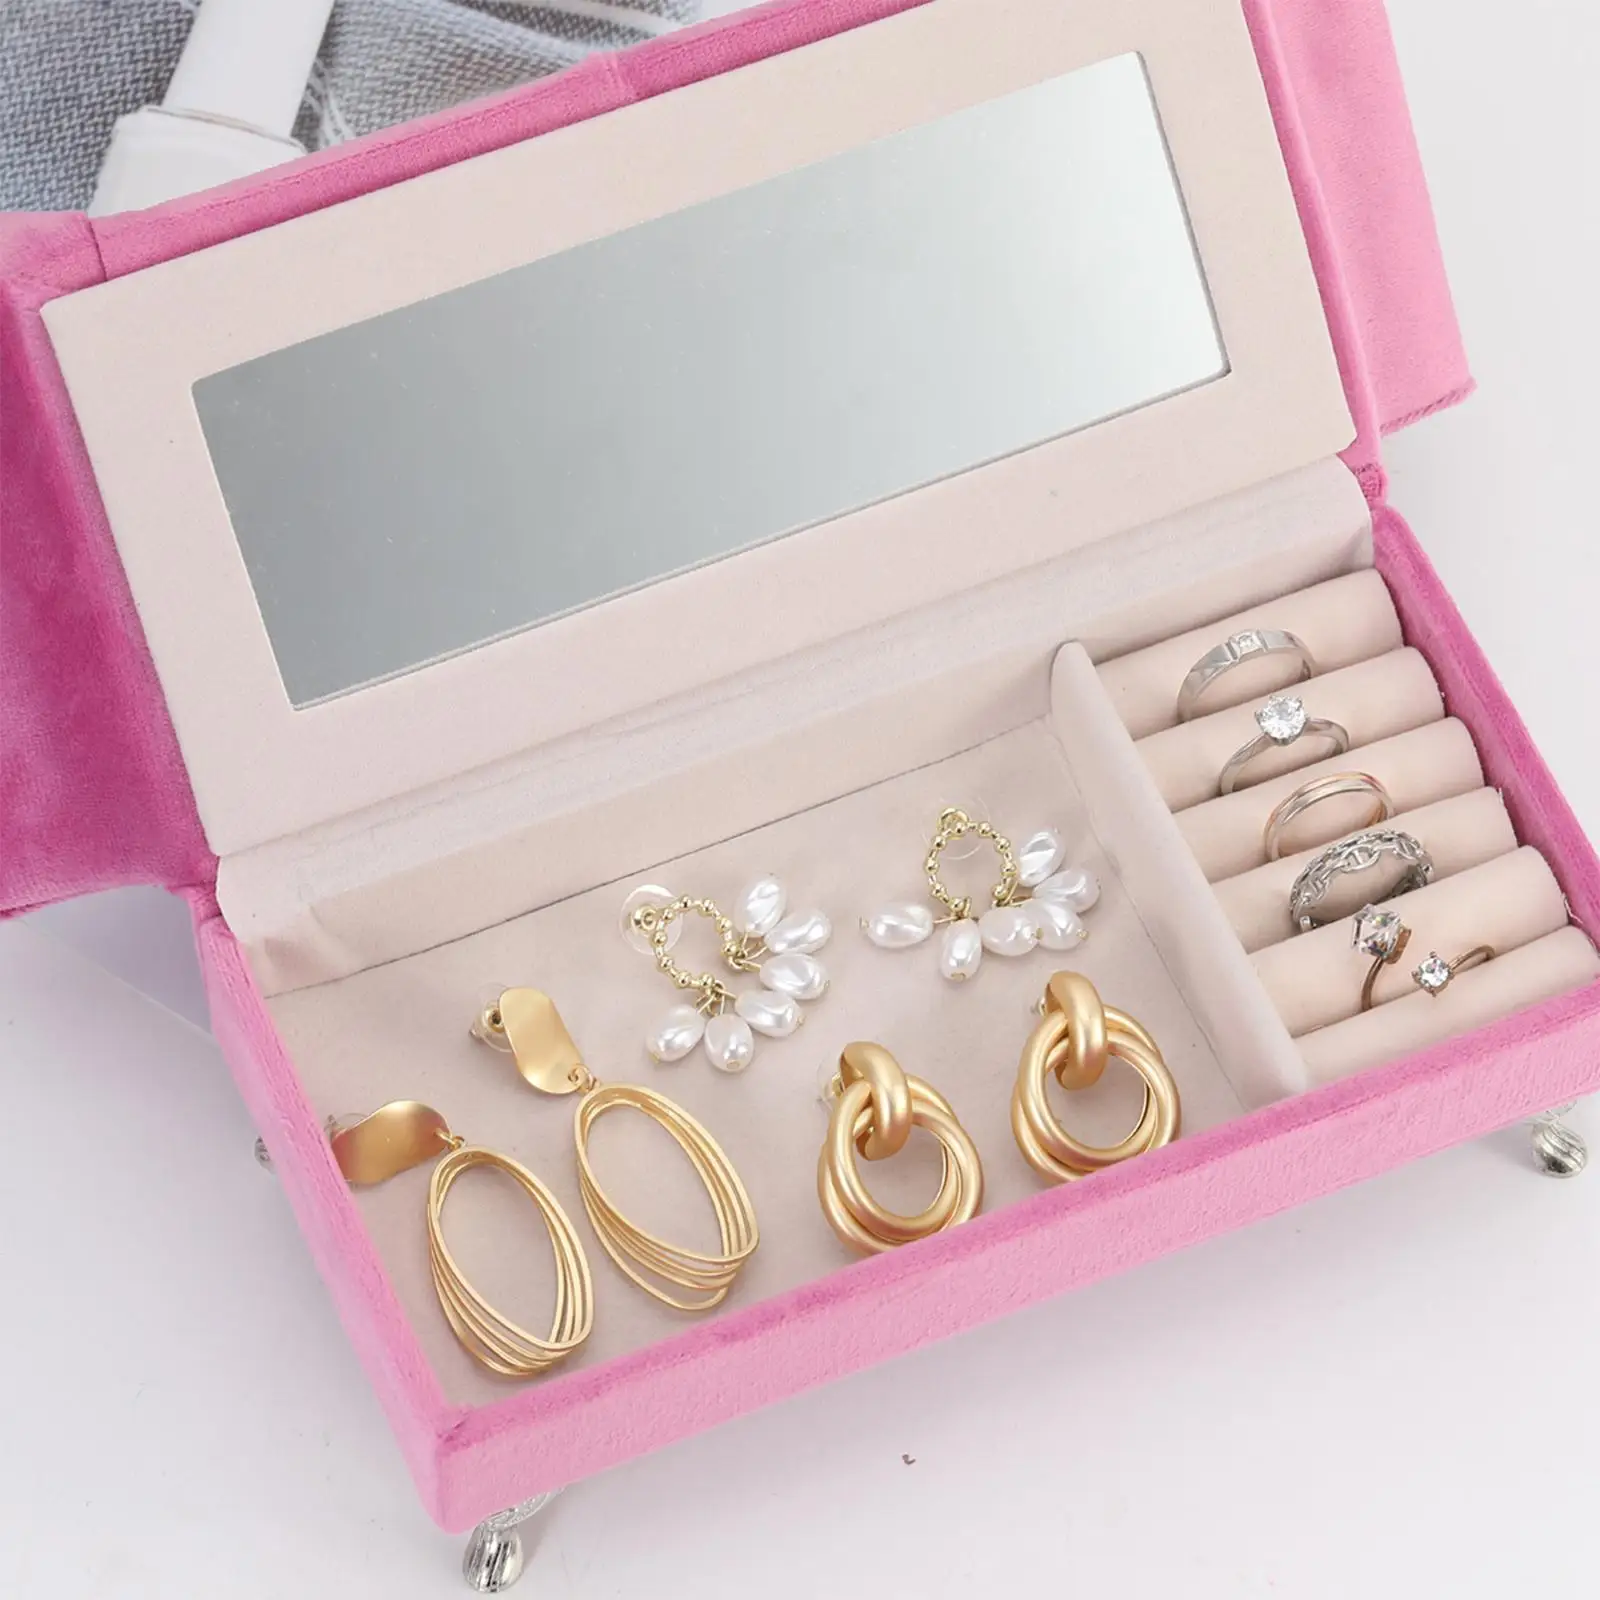 Cute Jewelry box Portable Storage Holder Display Case Soft Lining Gift Earrings Organizer for Bedside Table Vanity Table